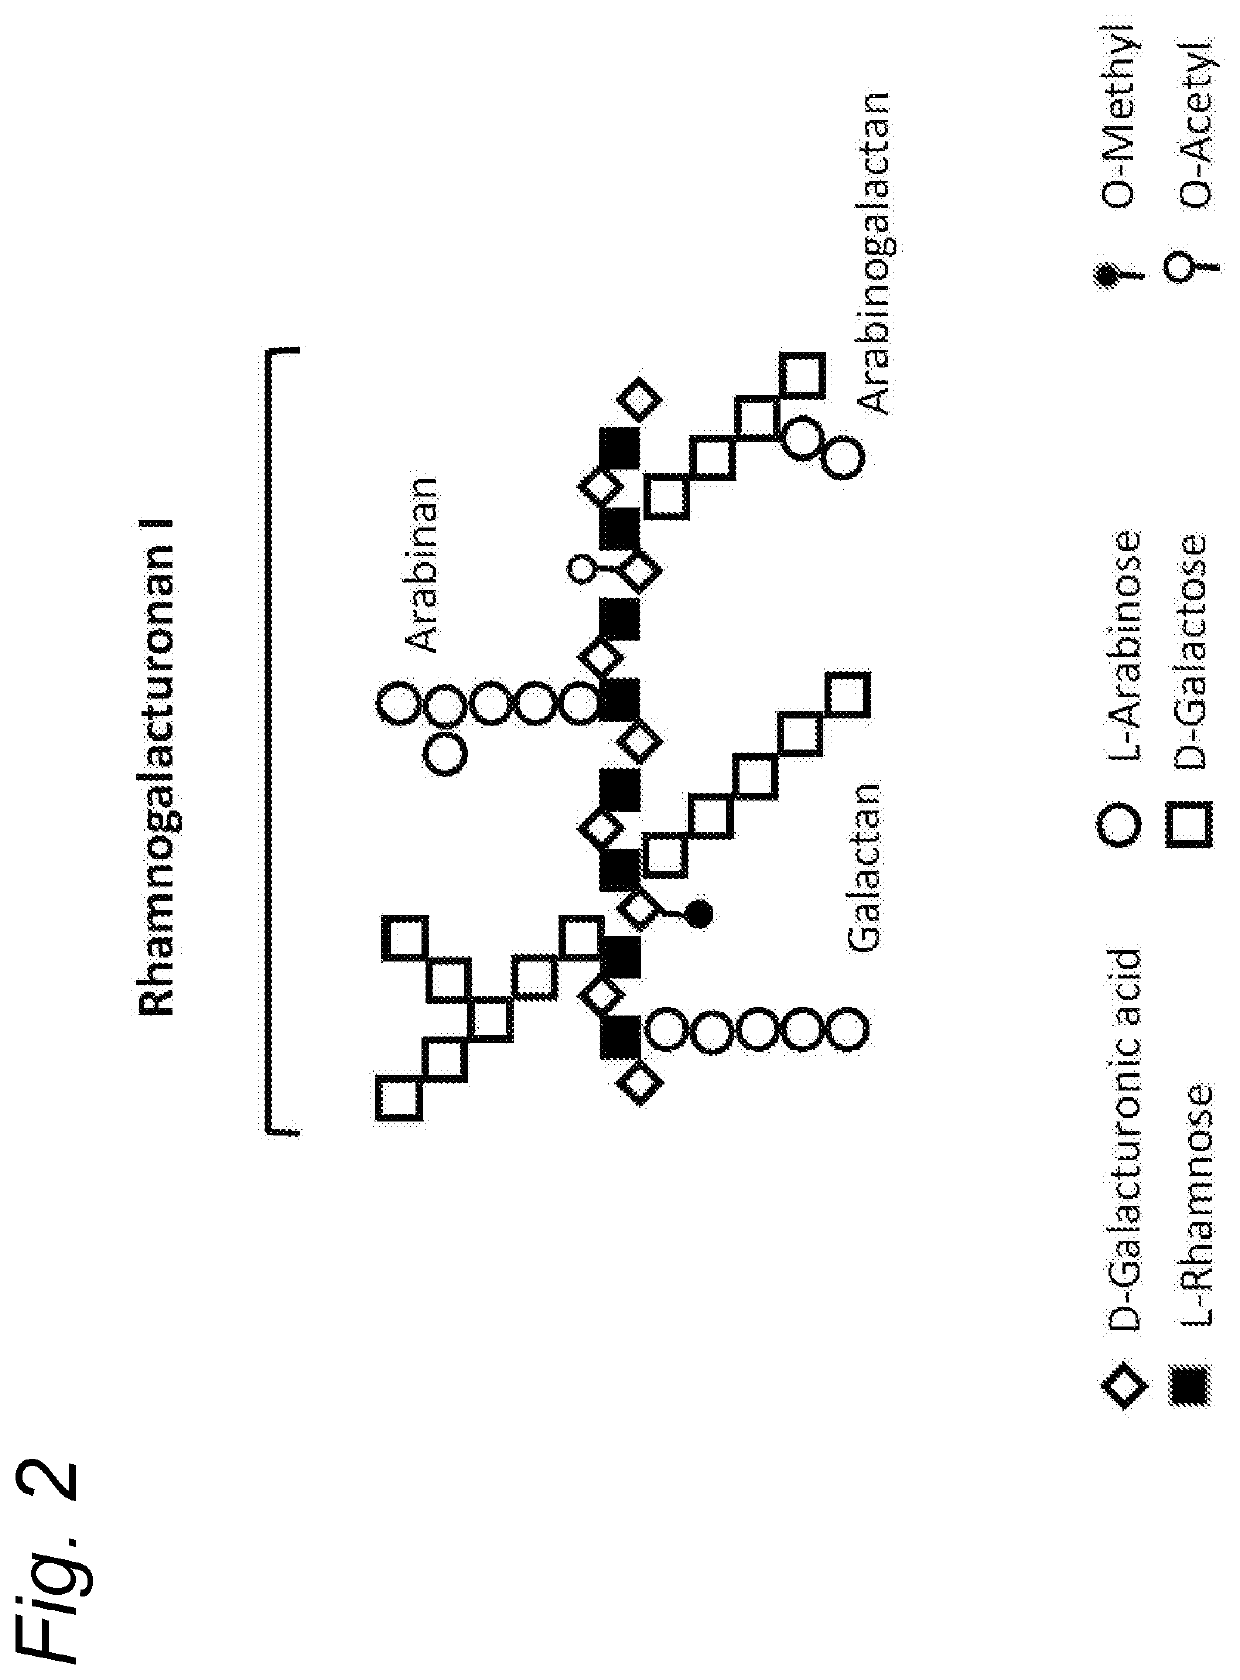 Enzymatically hydrolysed pectic polysaccharides for treating or preventing infections